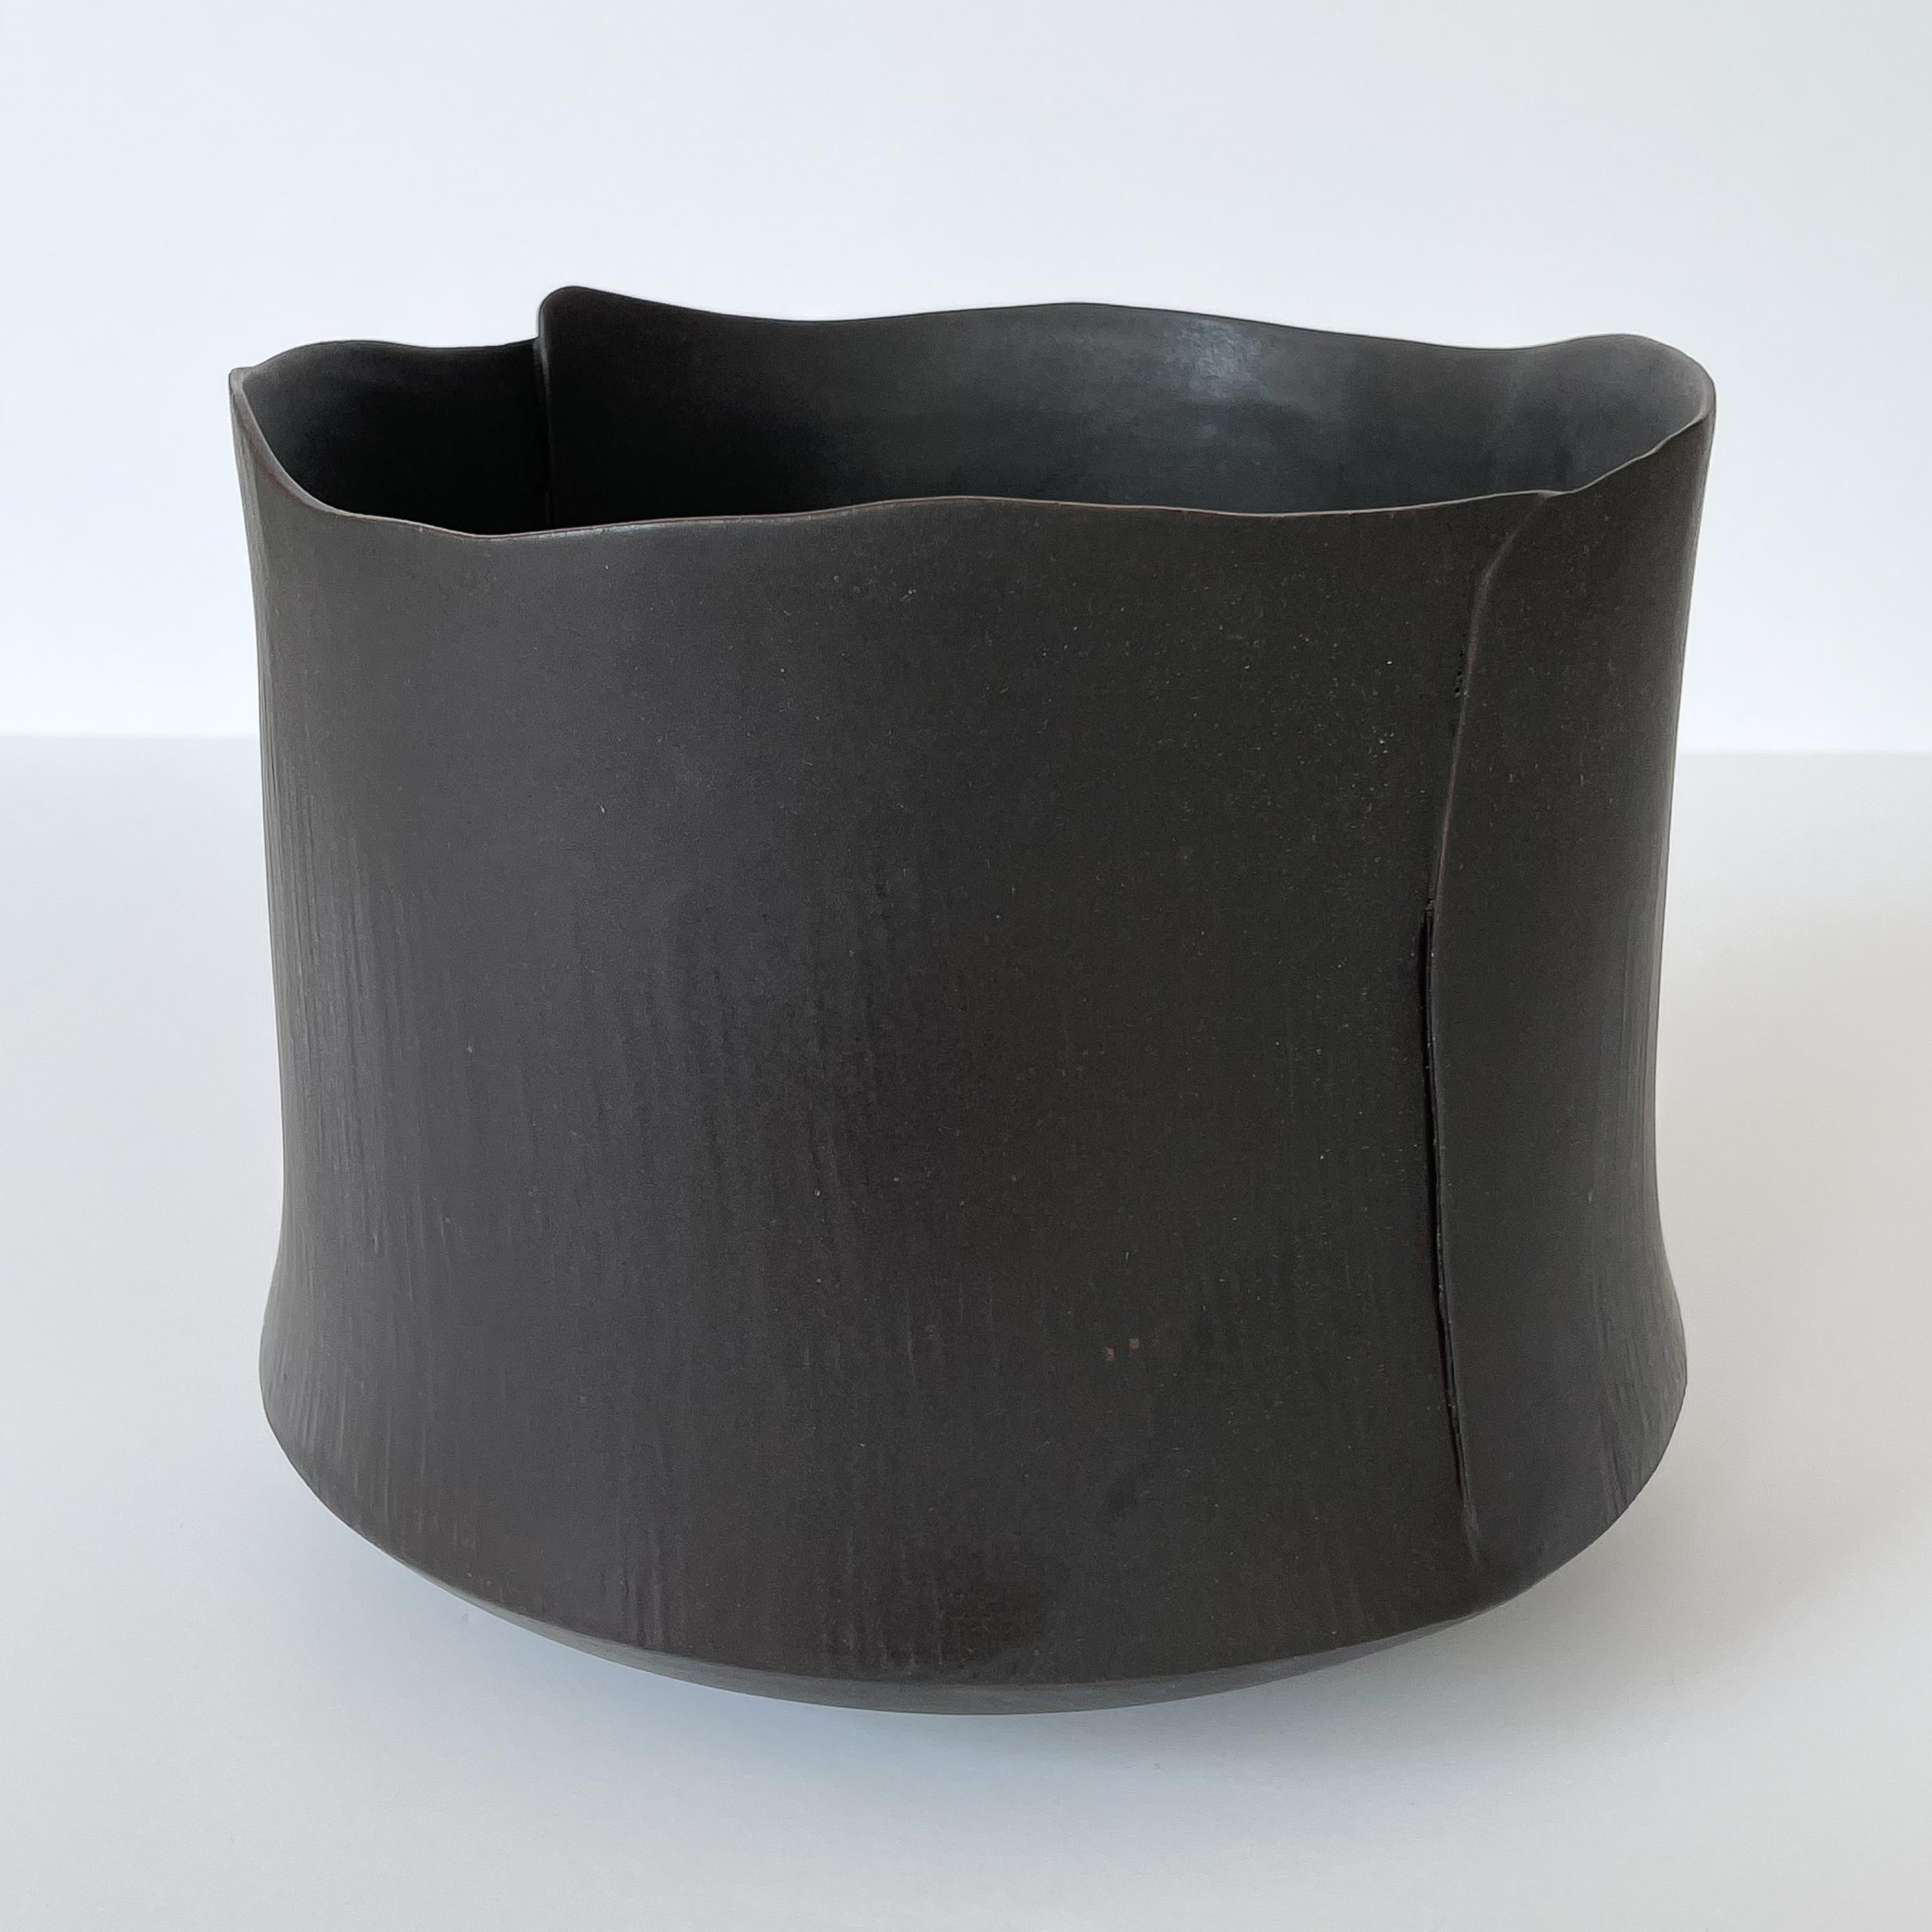 A large matte black glazed earthenware bowl by a North Carolina artisan. Minimalist and modern in form. Measures: 8.5